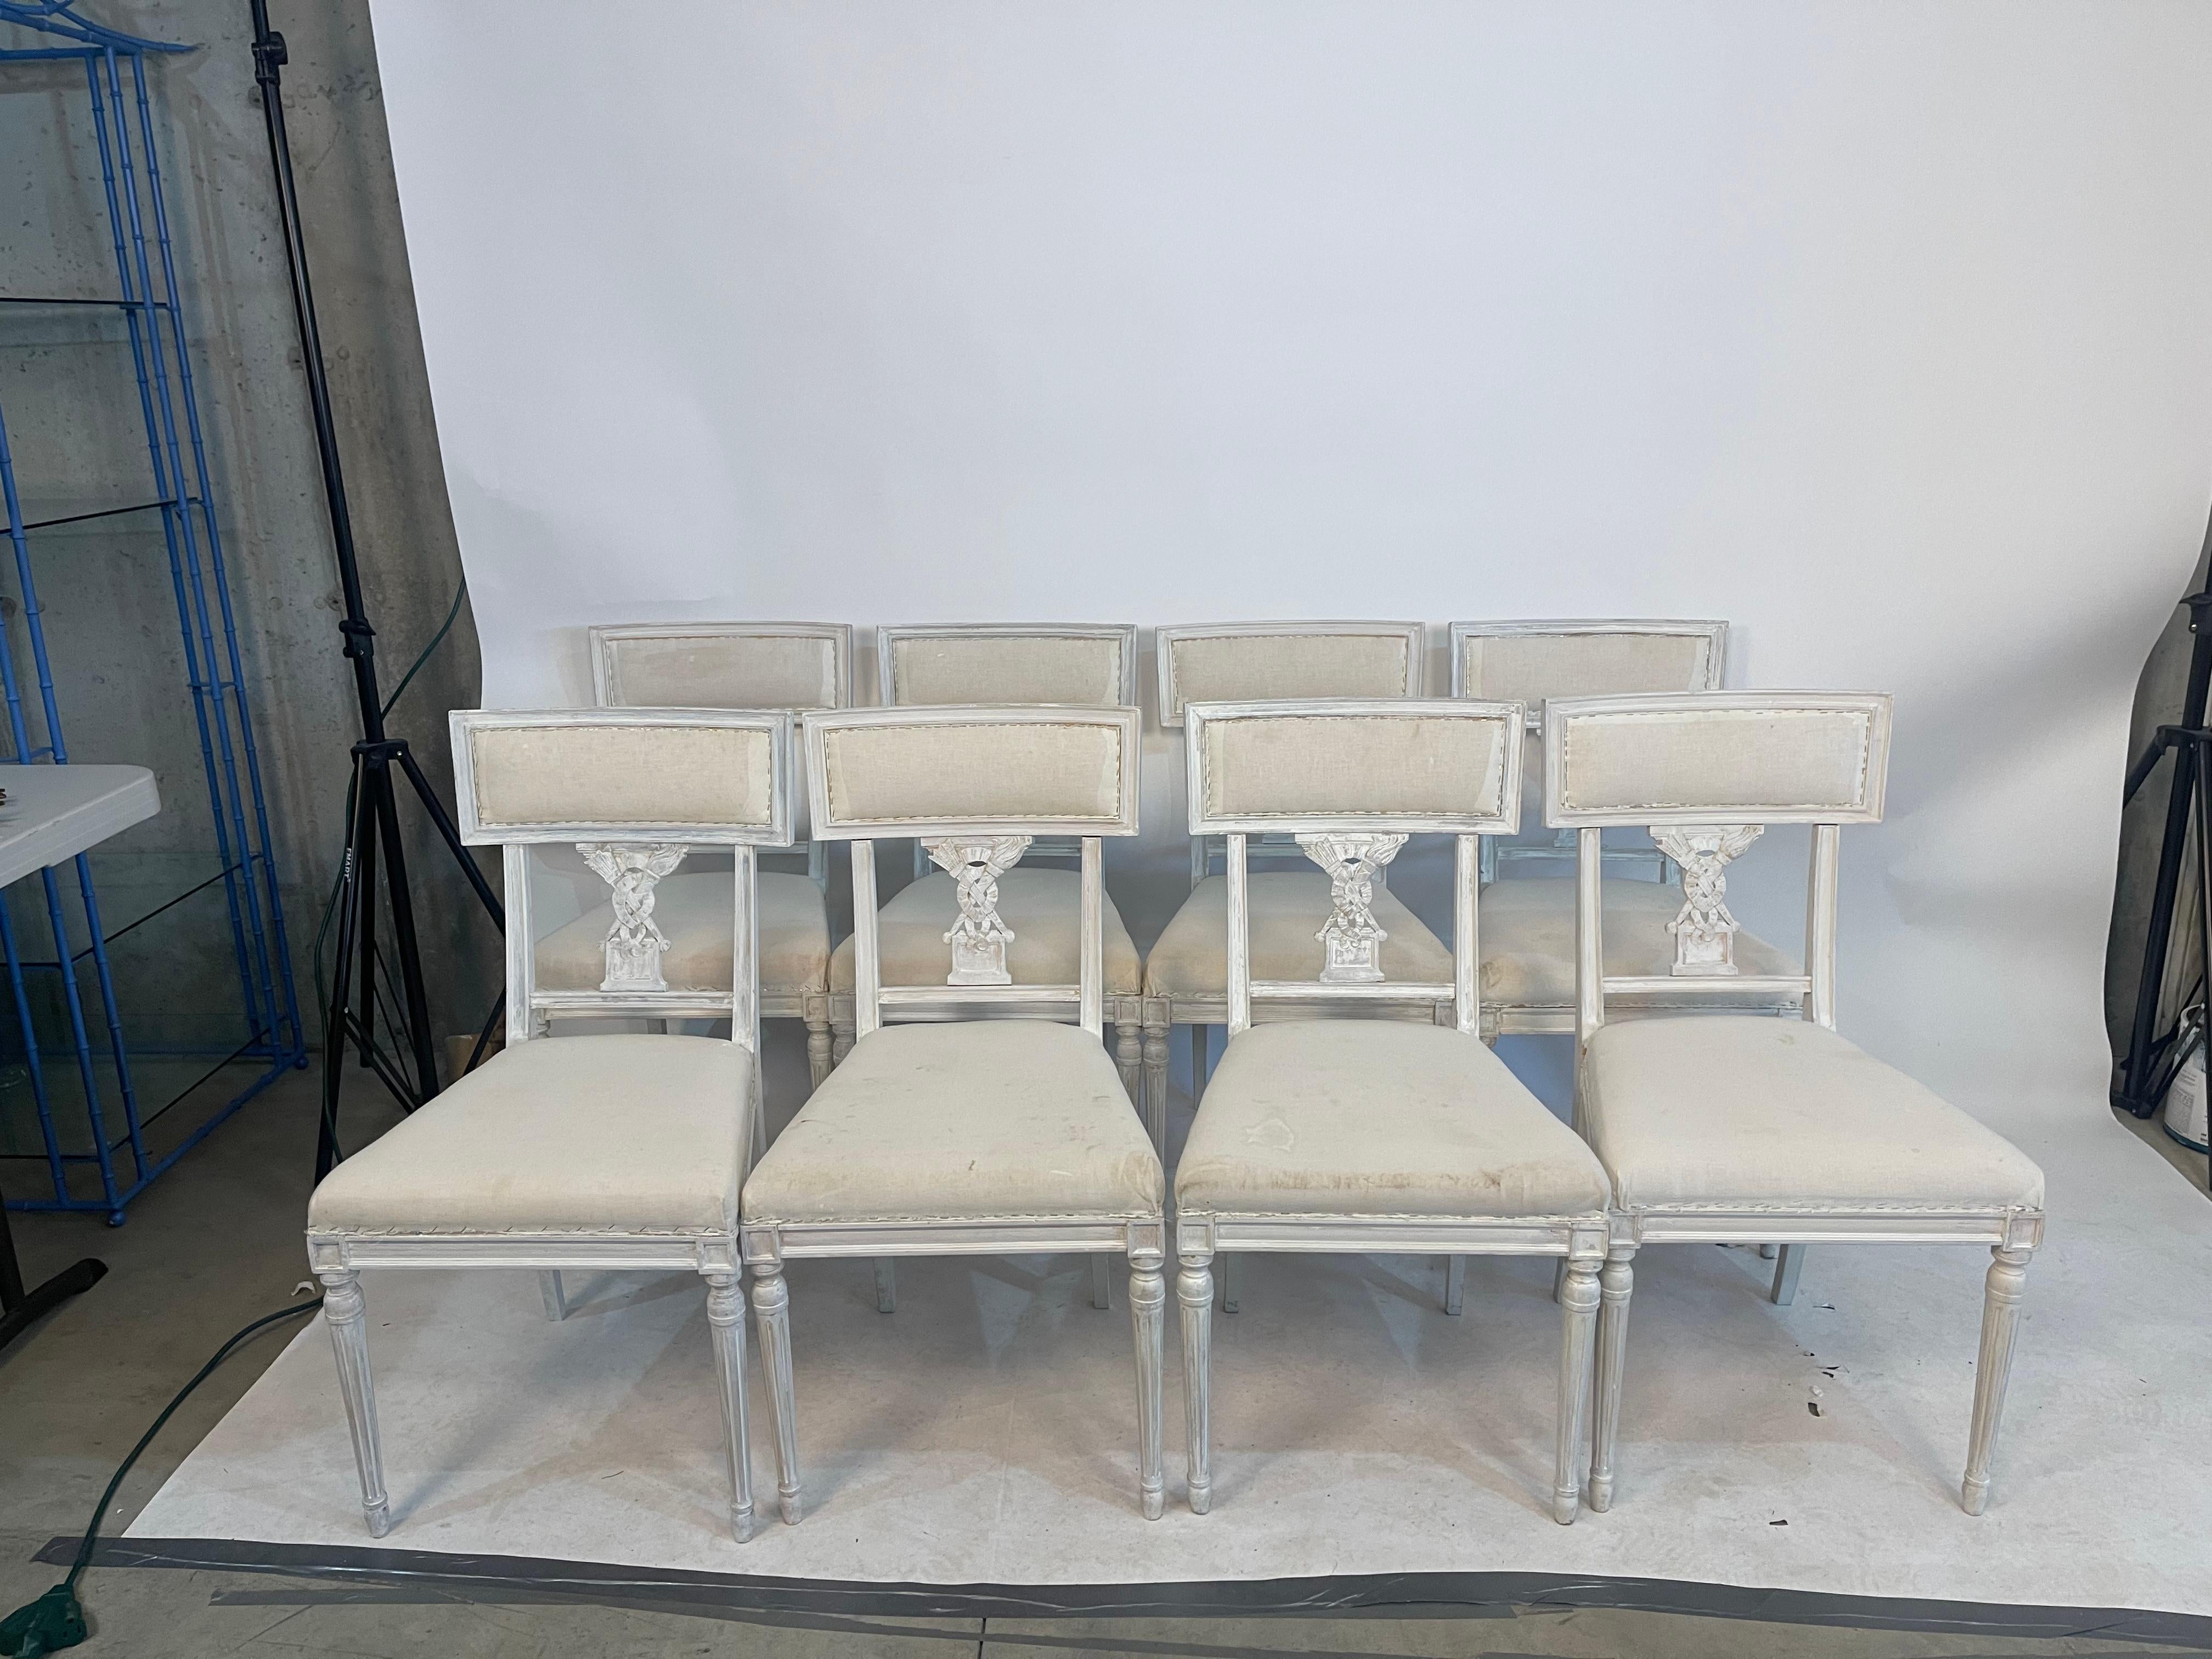 Set of 8 petite Northern European dining chairs in washed white wood paint with neoclassical decoration on the back splat. The decoration includes crossed flaming torches on a classical plinth. The all-over effect is a stylish classical chair